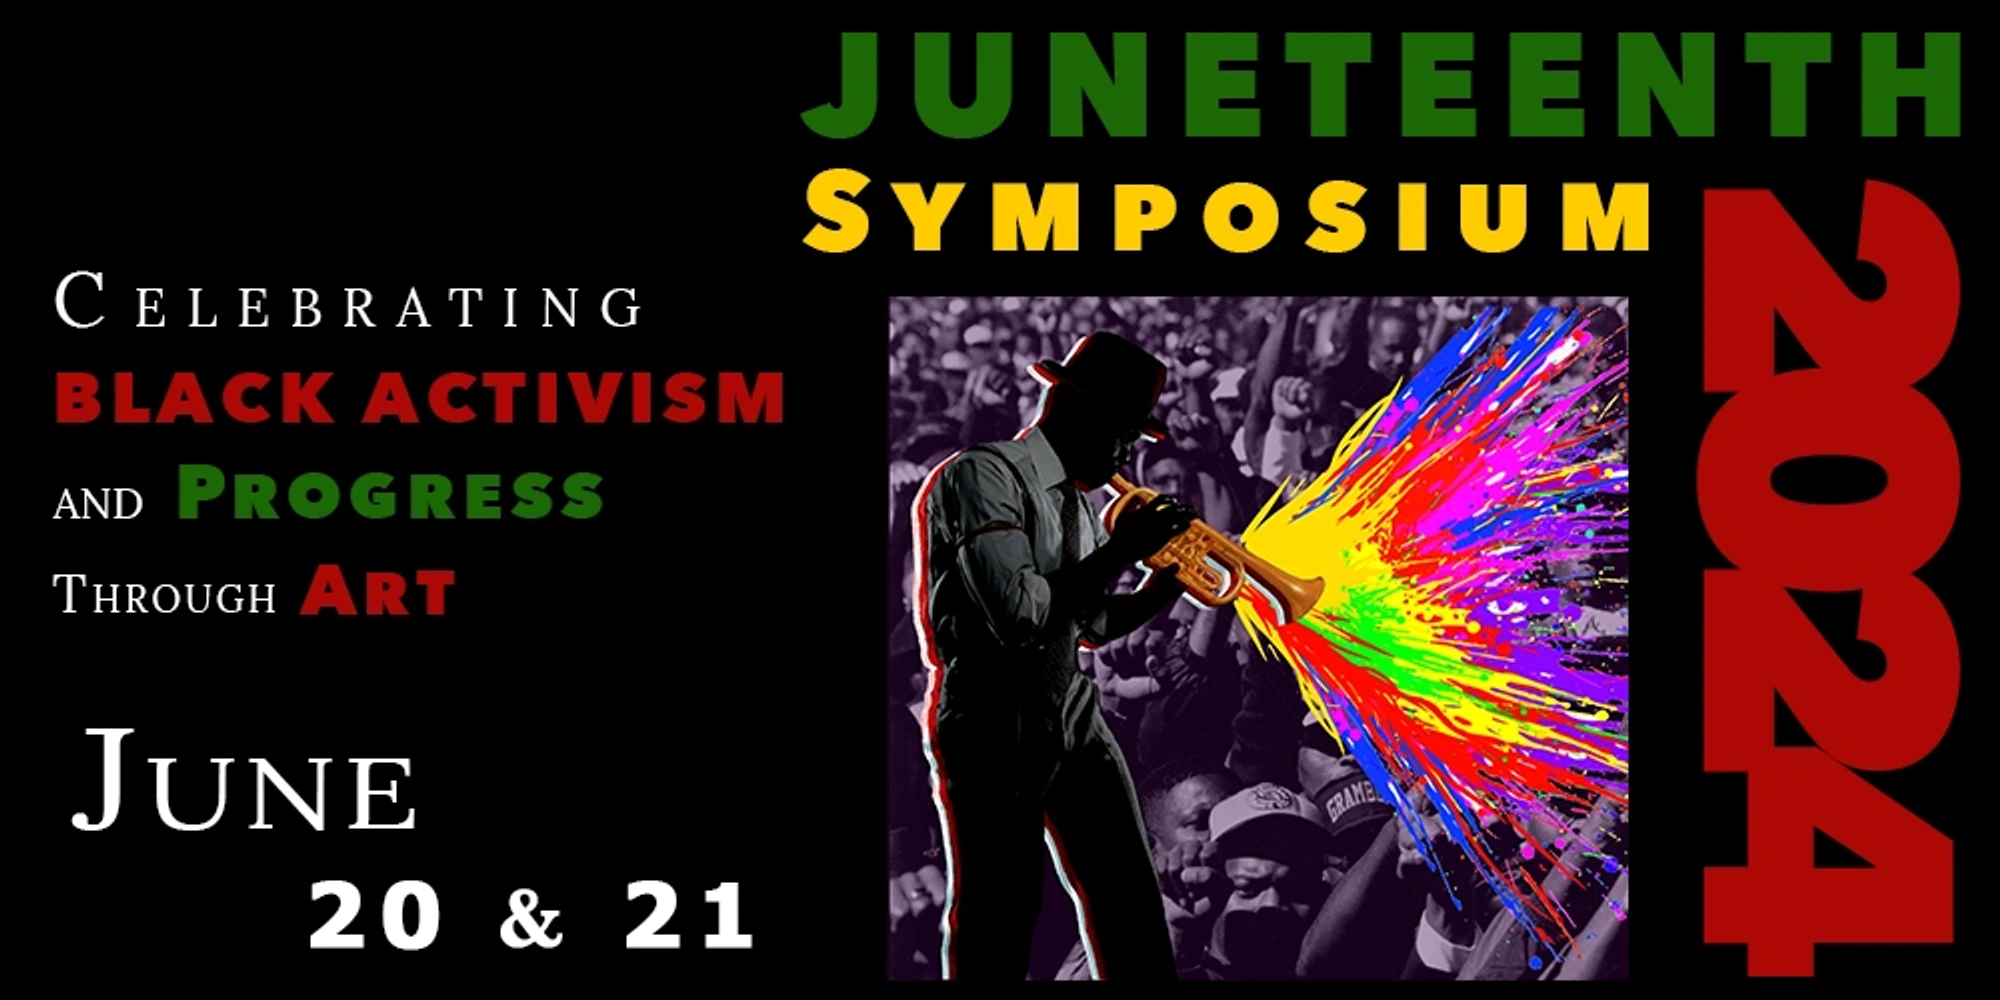 silhouette of man playing trumpet with a splash of color coming out of it; background image of diverse group of people with their fists in the air